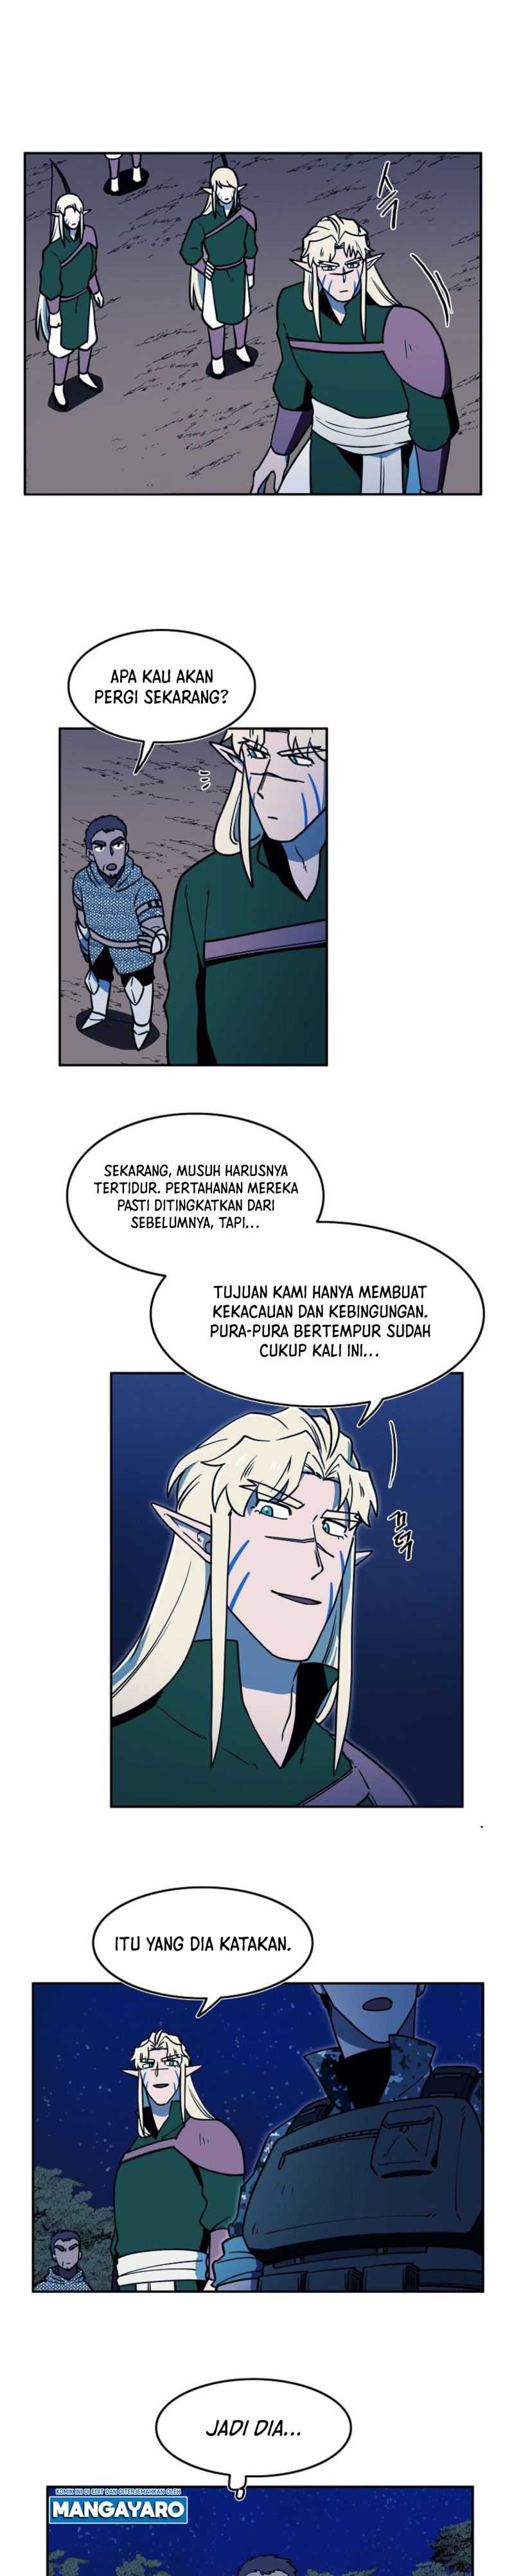 Magical Shooting: Sniper of Steel Chapter 47